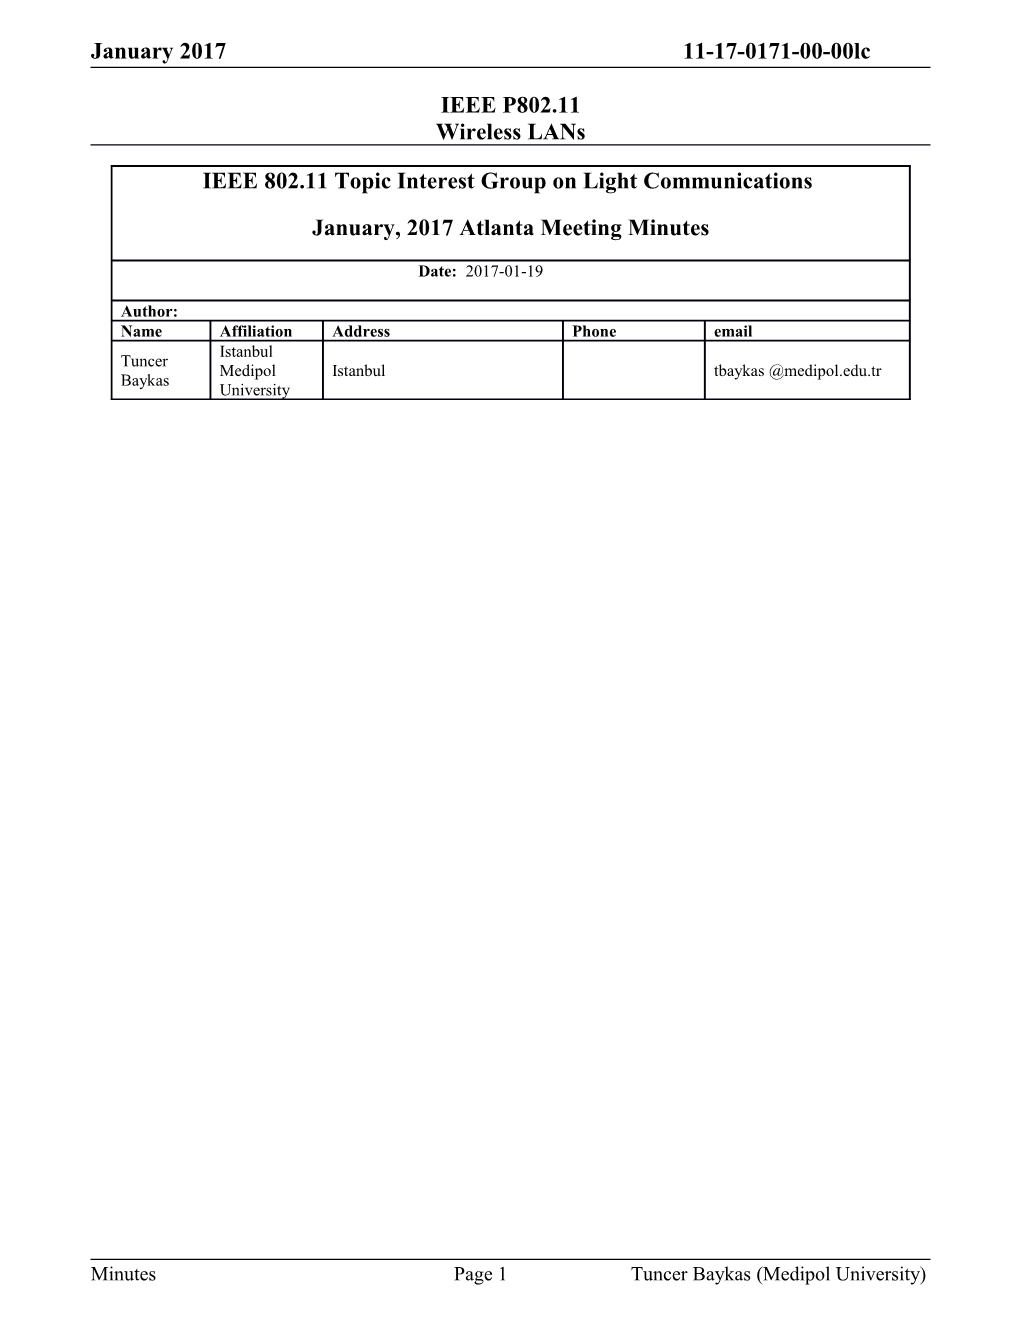 IEEE 802.11 Topic Interest Group on Light Communications